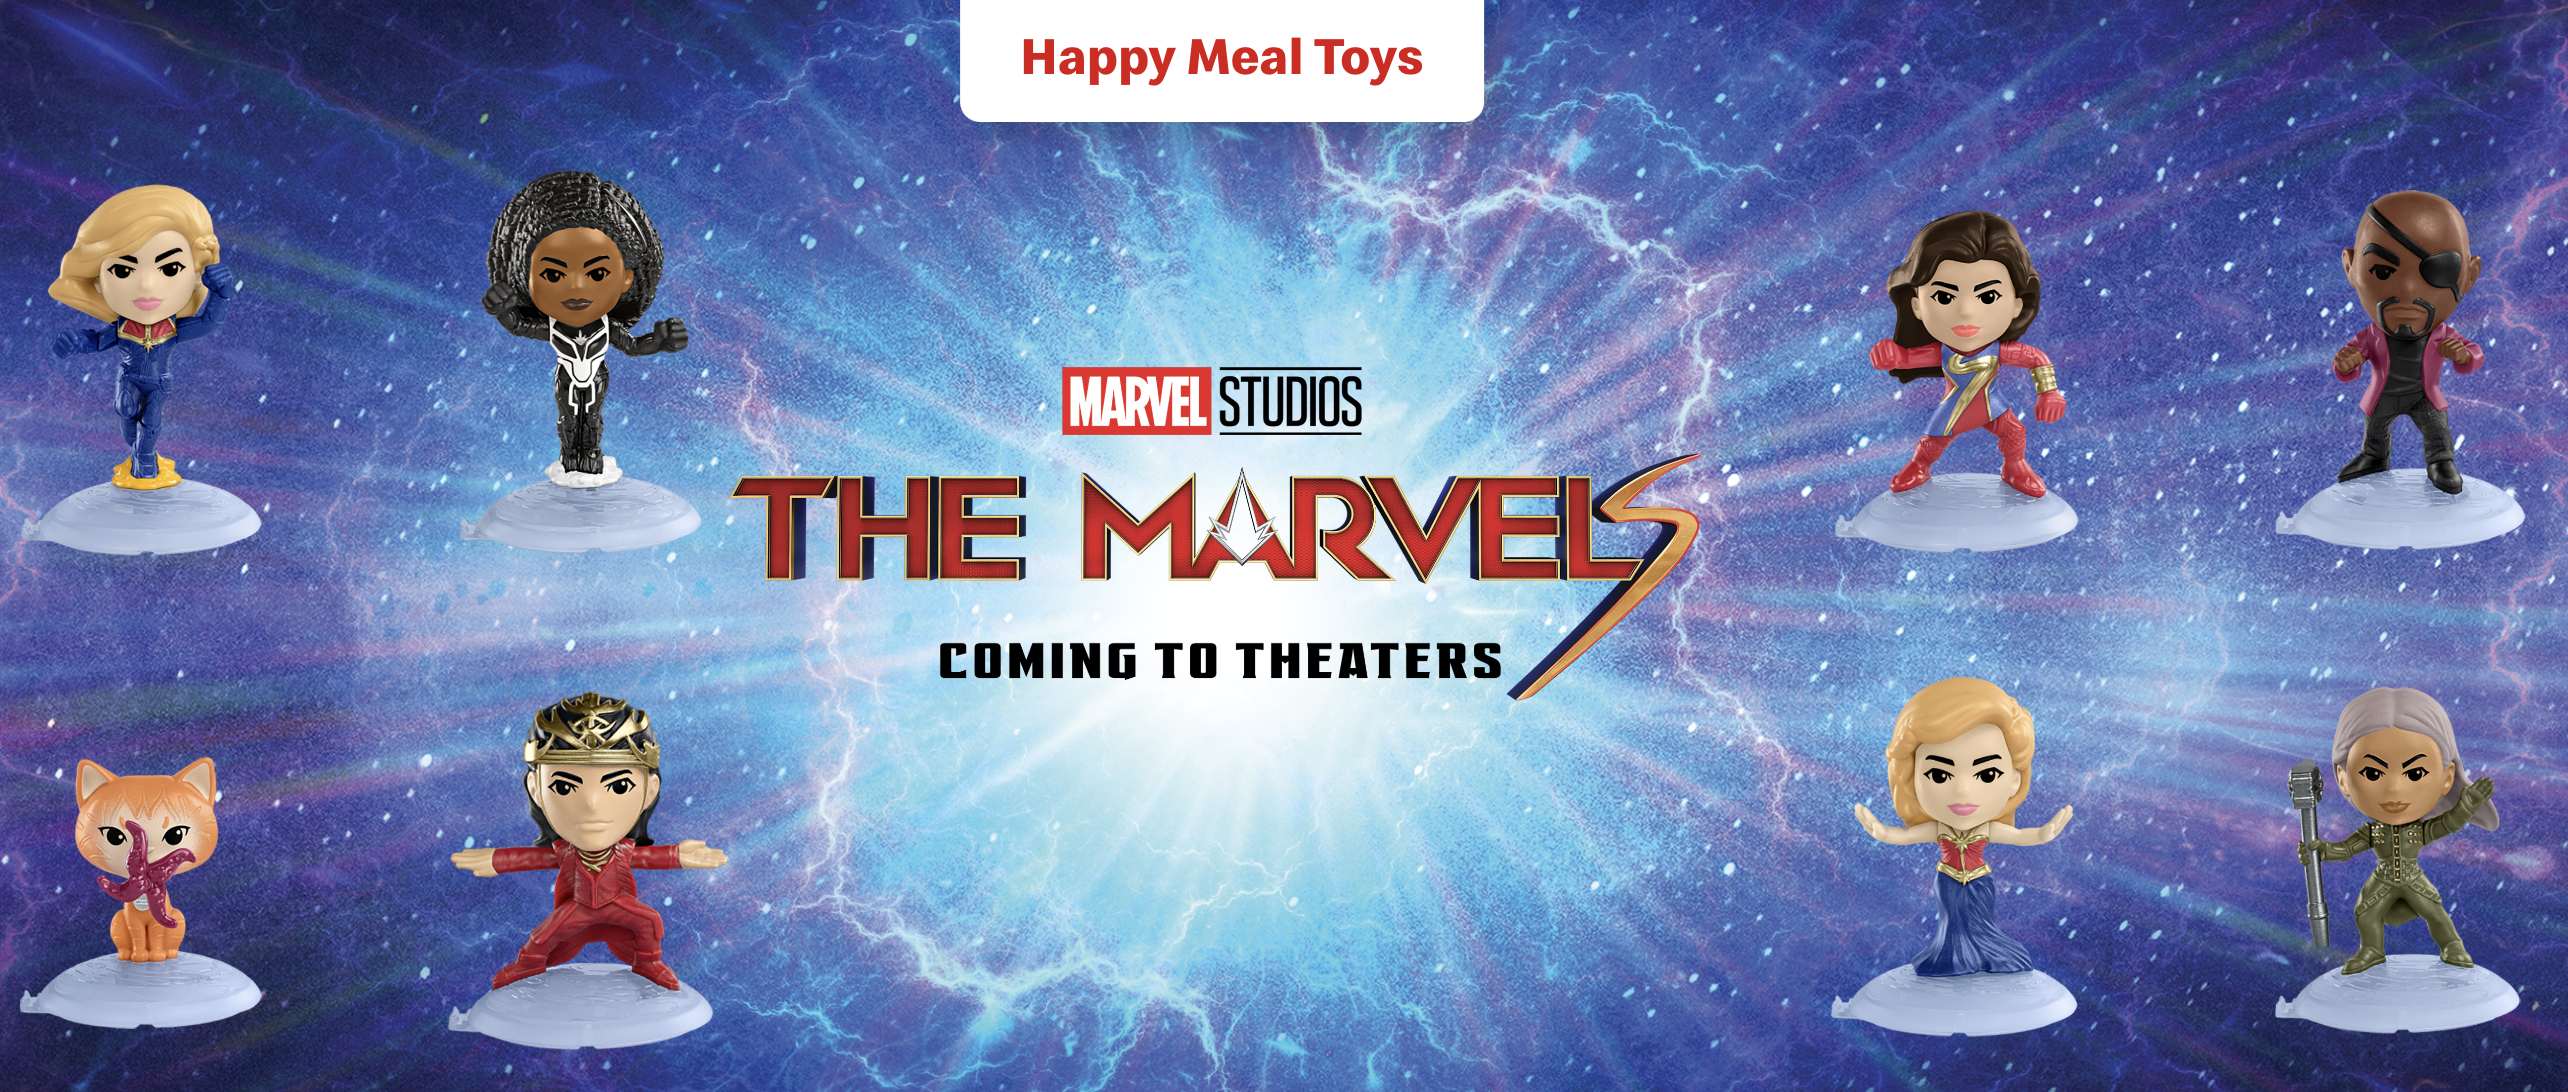 McDonald's the marvels happy meal toys